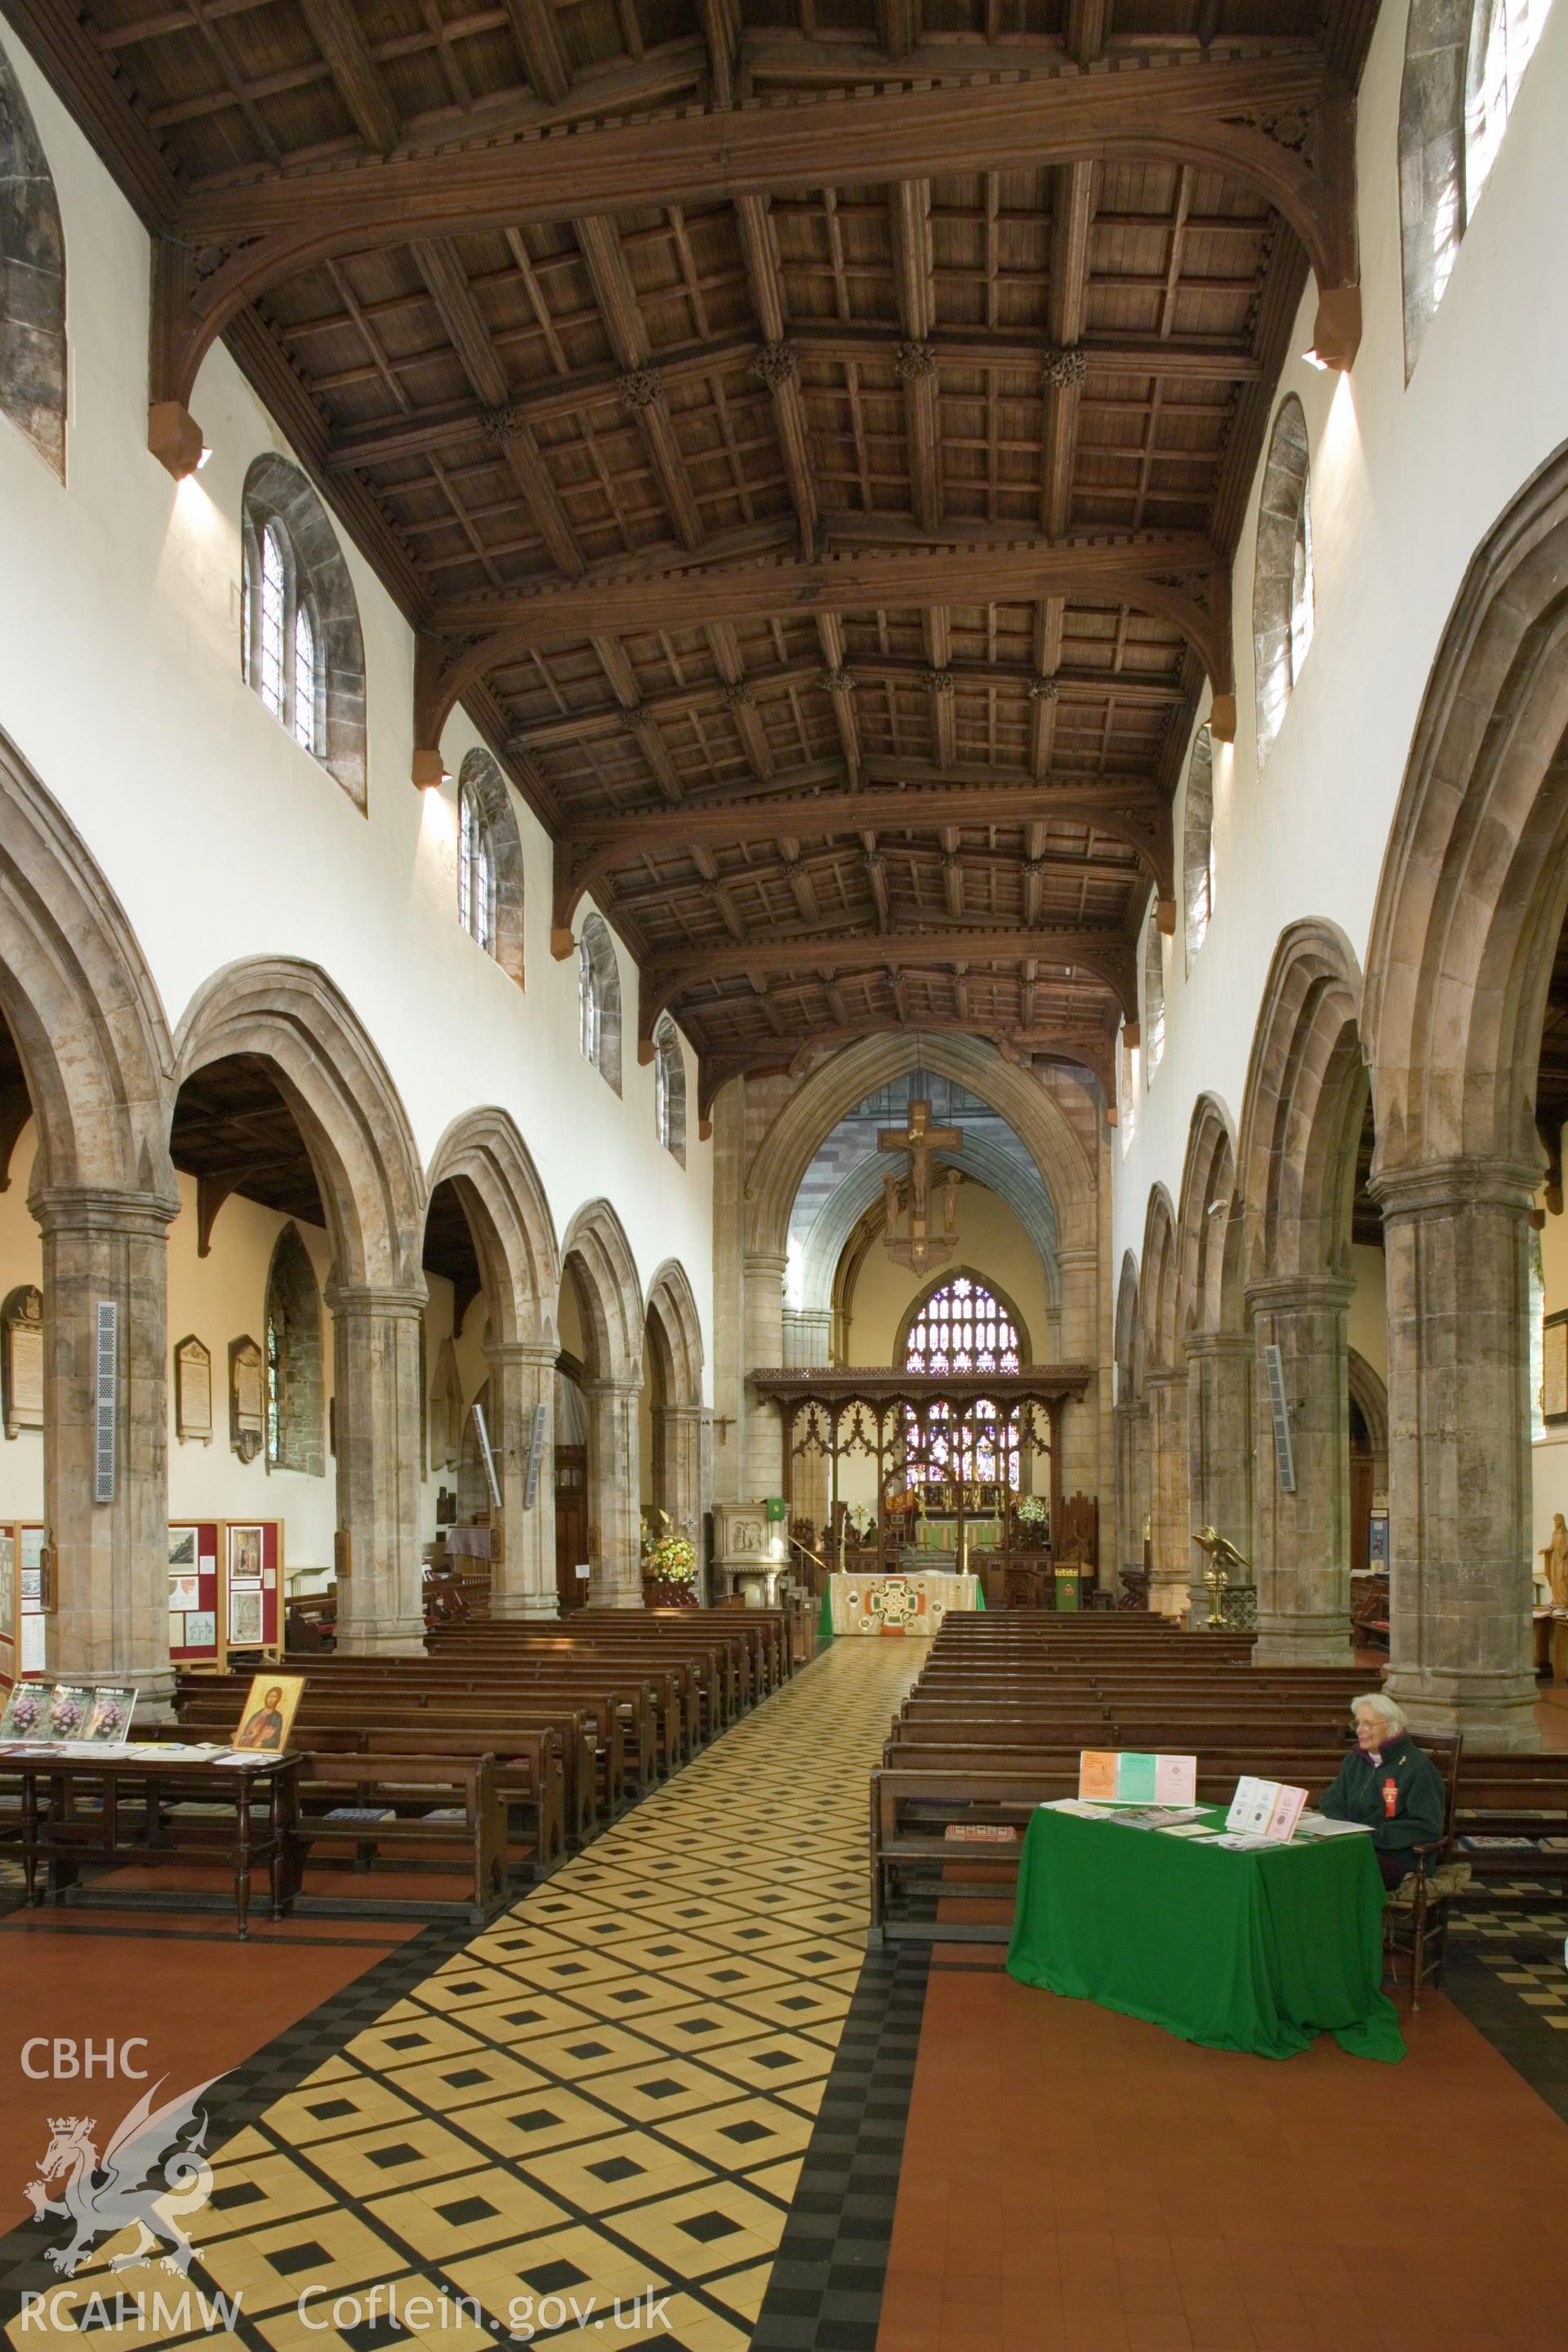 Interior, looking up the nave towards the altar.